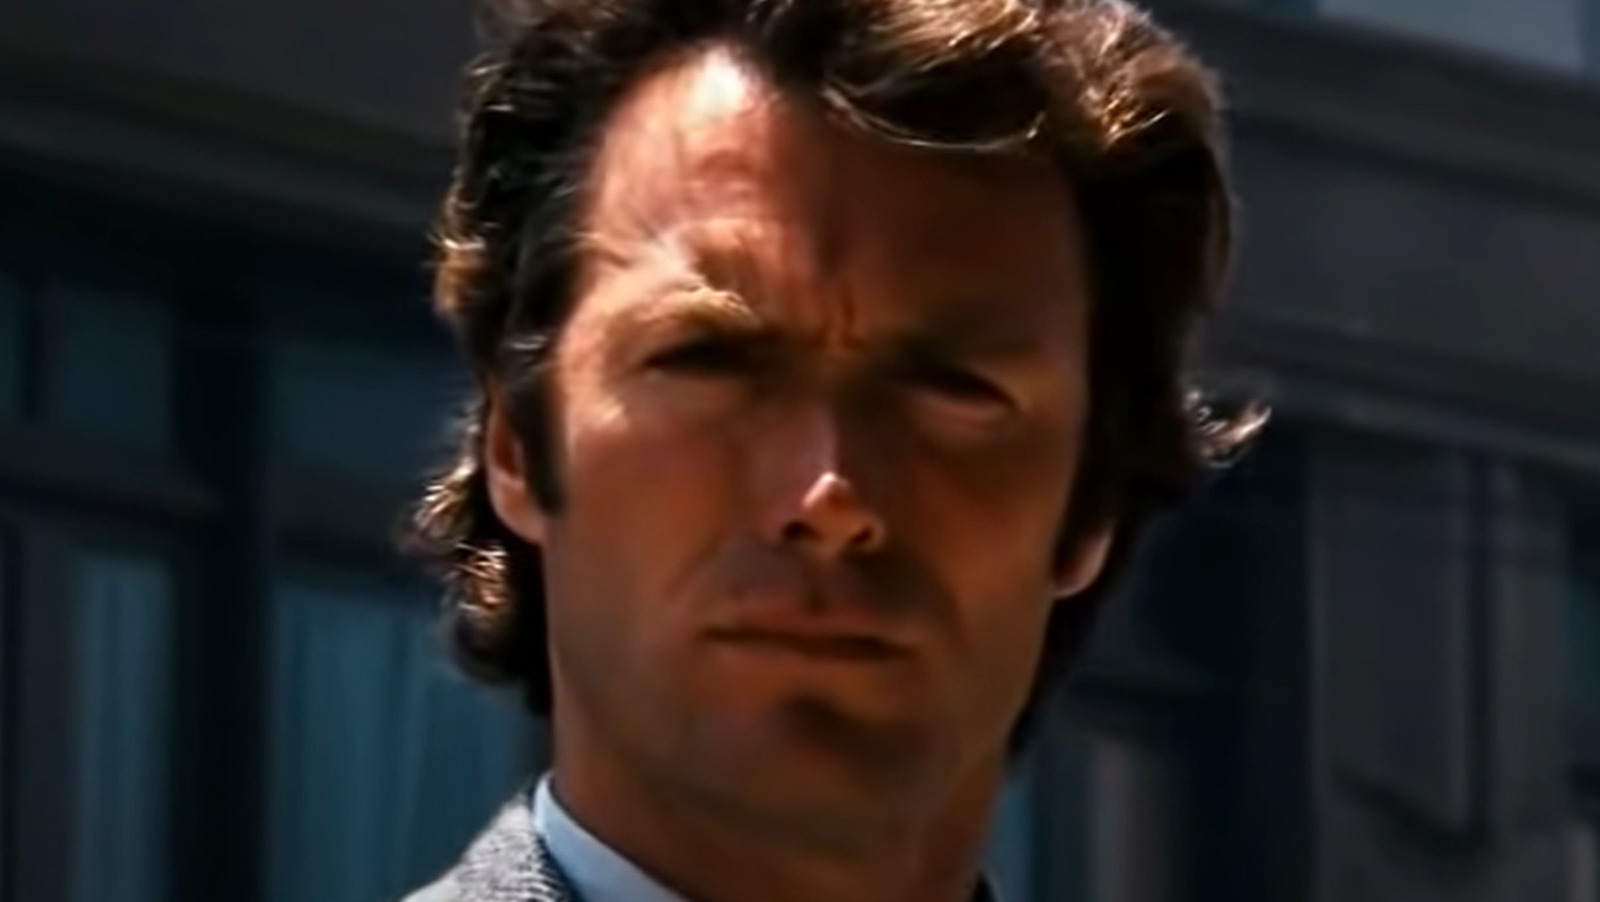 Every Dirty Job That Comes Along: Dirty Harry